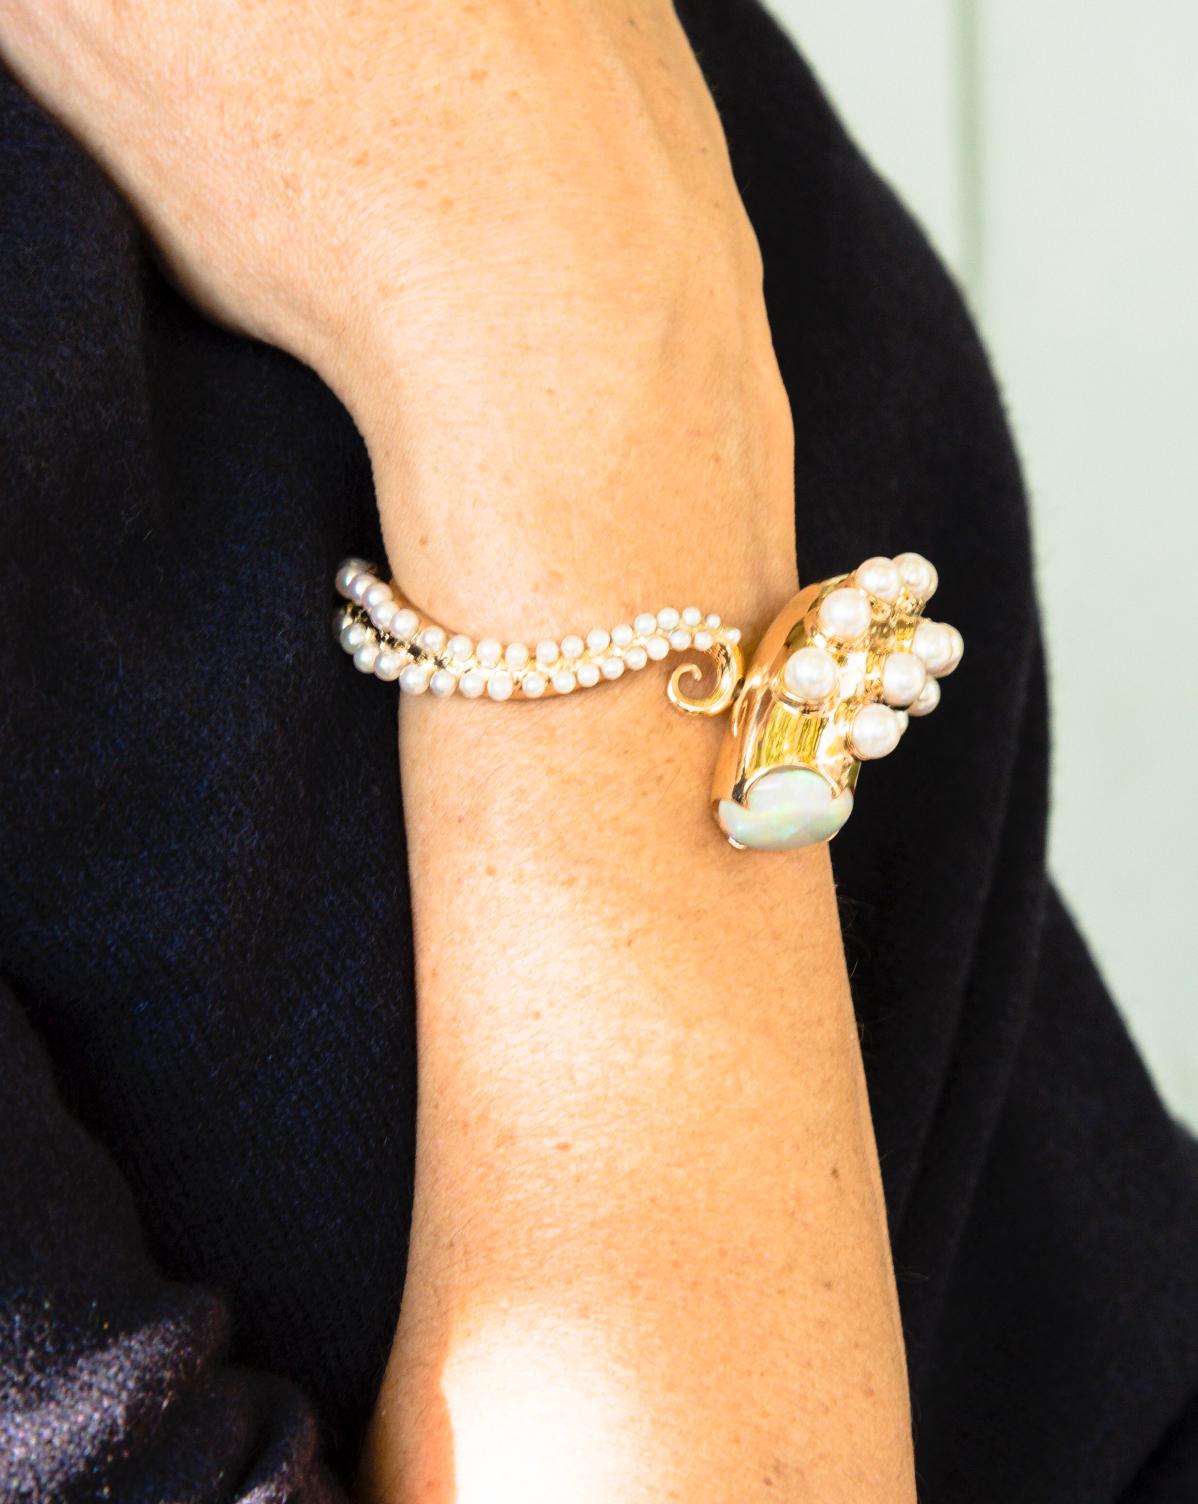 Hydra 18K Rose Gold and Akoya Pearls tentacle Bracelet by Frederique Berman.
Hydra octopus tentacle one of a kind bracelet : 
Hydra's tentacle wraps around the wrist, but its suction cups are soft, capturing the brightness of pearls. 
Hydra, a